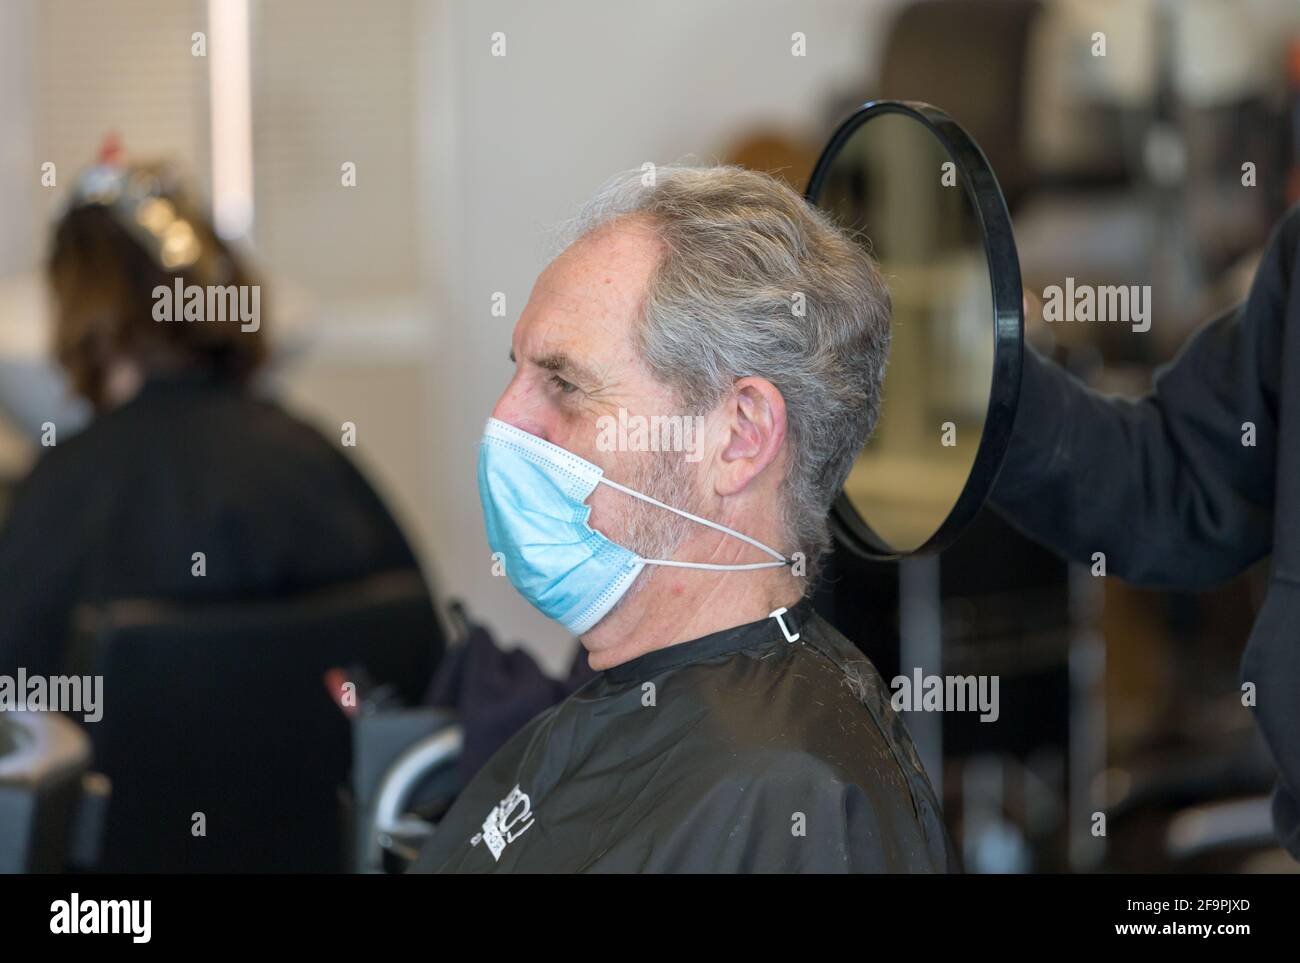 02.03.2021, Bremen, Bremen, Germany - Opening of the salon after the 2nd corona wave, client looking at the finished haircut in the mirror. 00A210302D Stock Photo